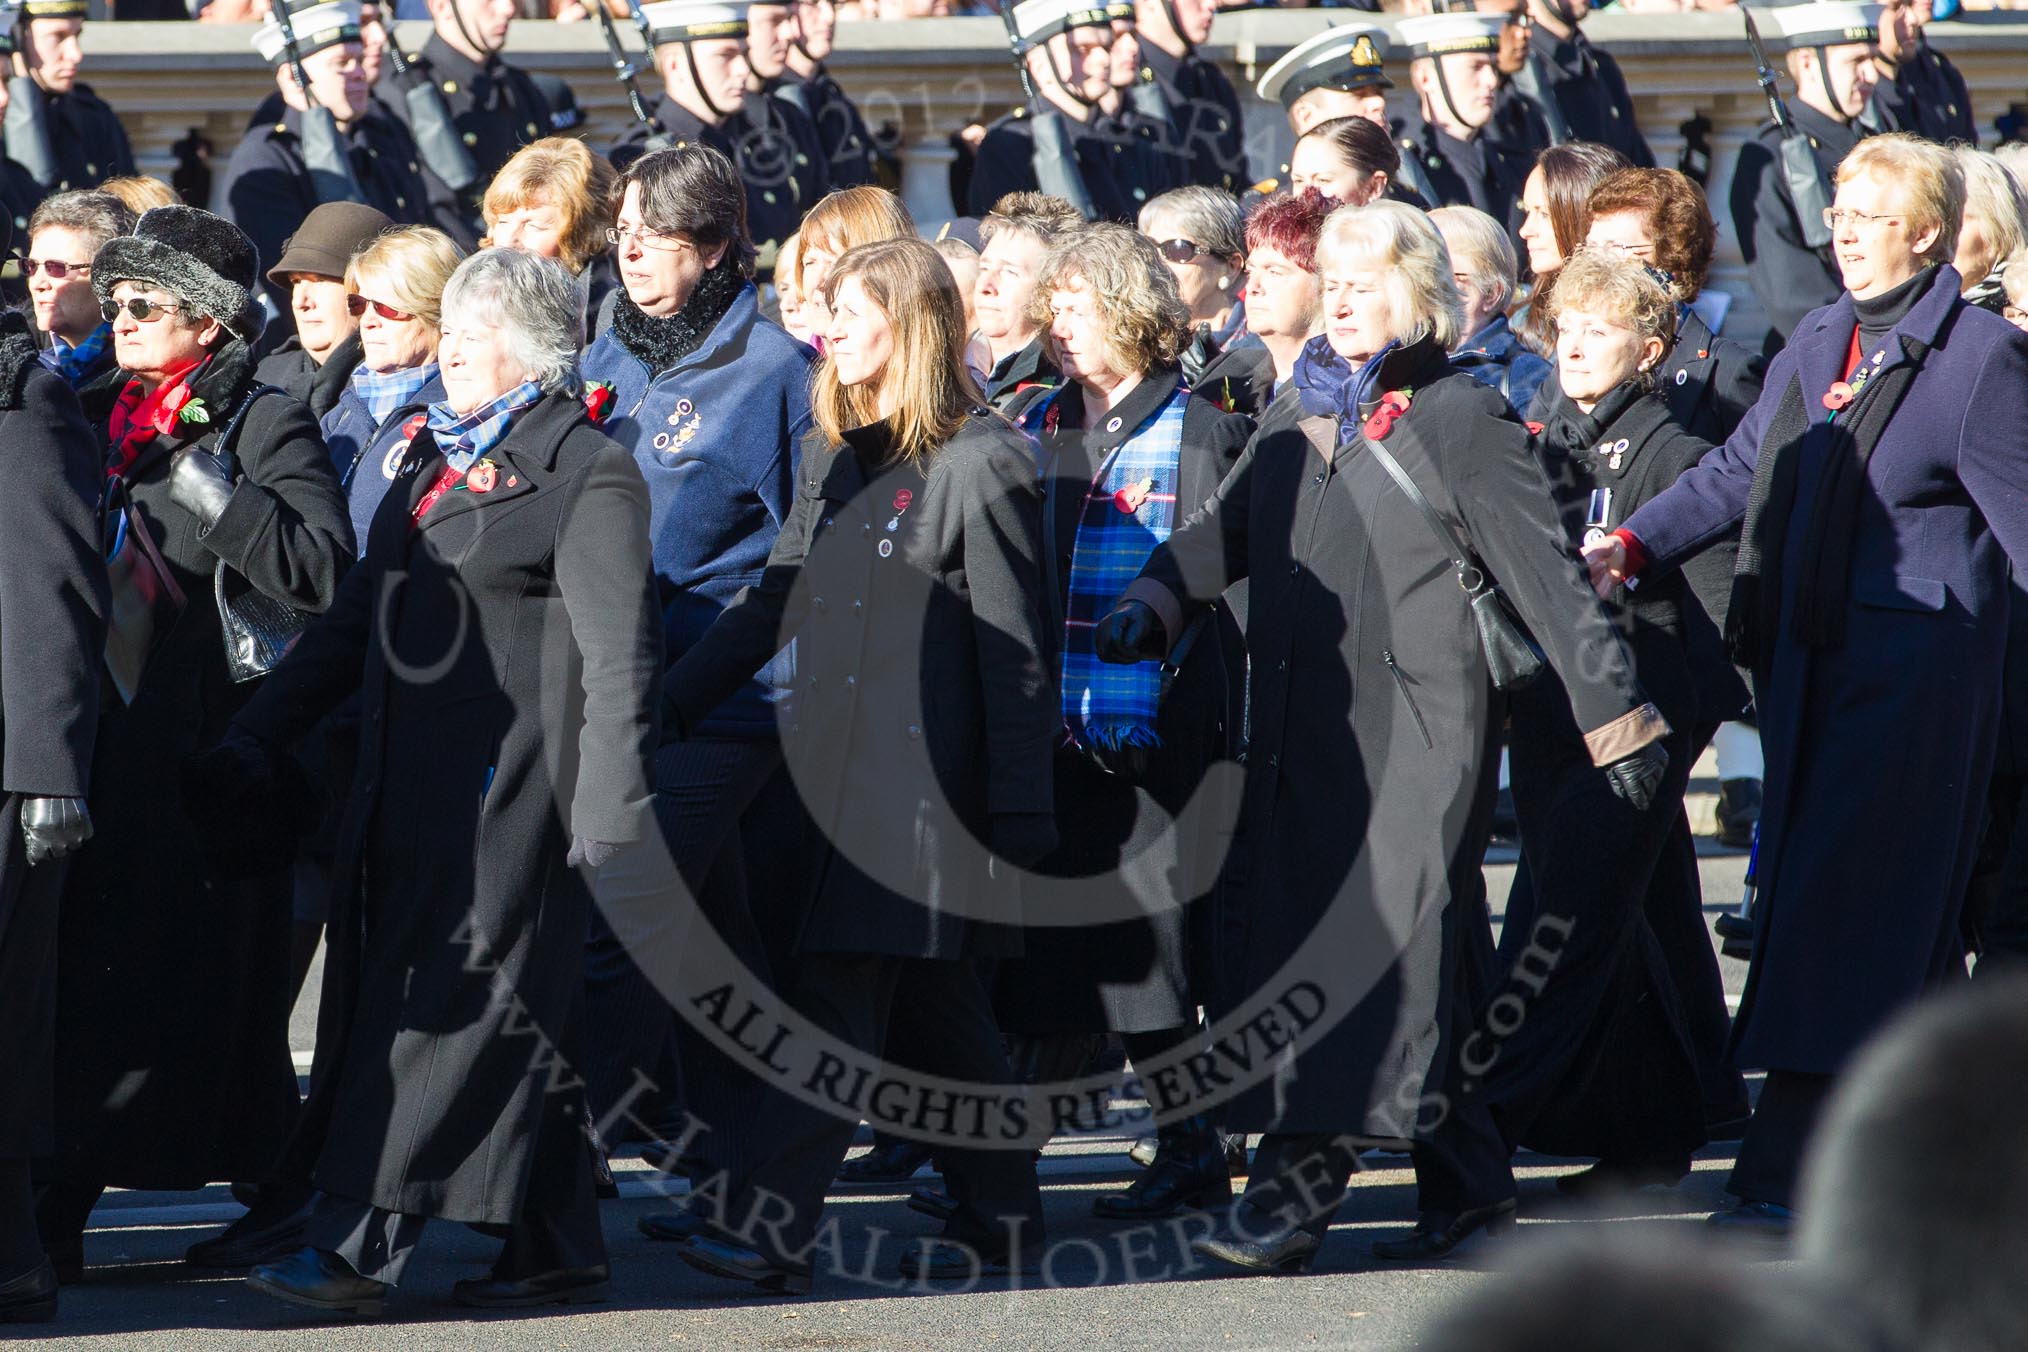 Remembrance Sunday 2012 Cenotaph March Past: Group E29 - Association of WRENS..
Whitehall, Cenotaph,
London SW1,

United Kingdom,
on 11 November 2012 at 11:41, image #211